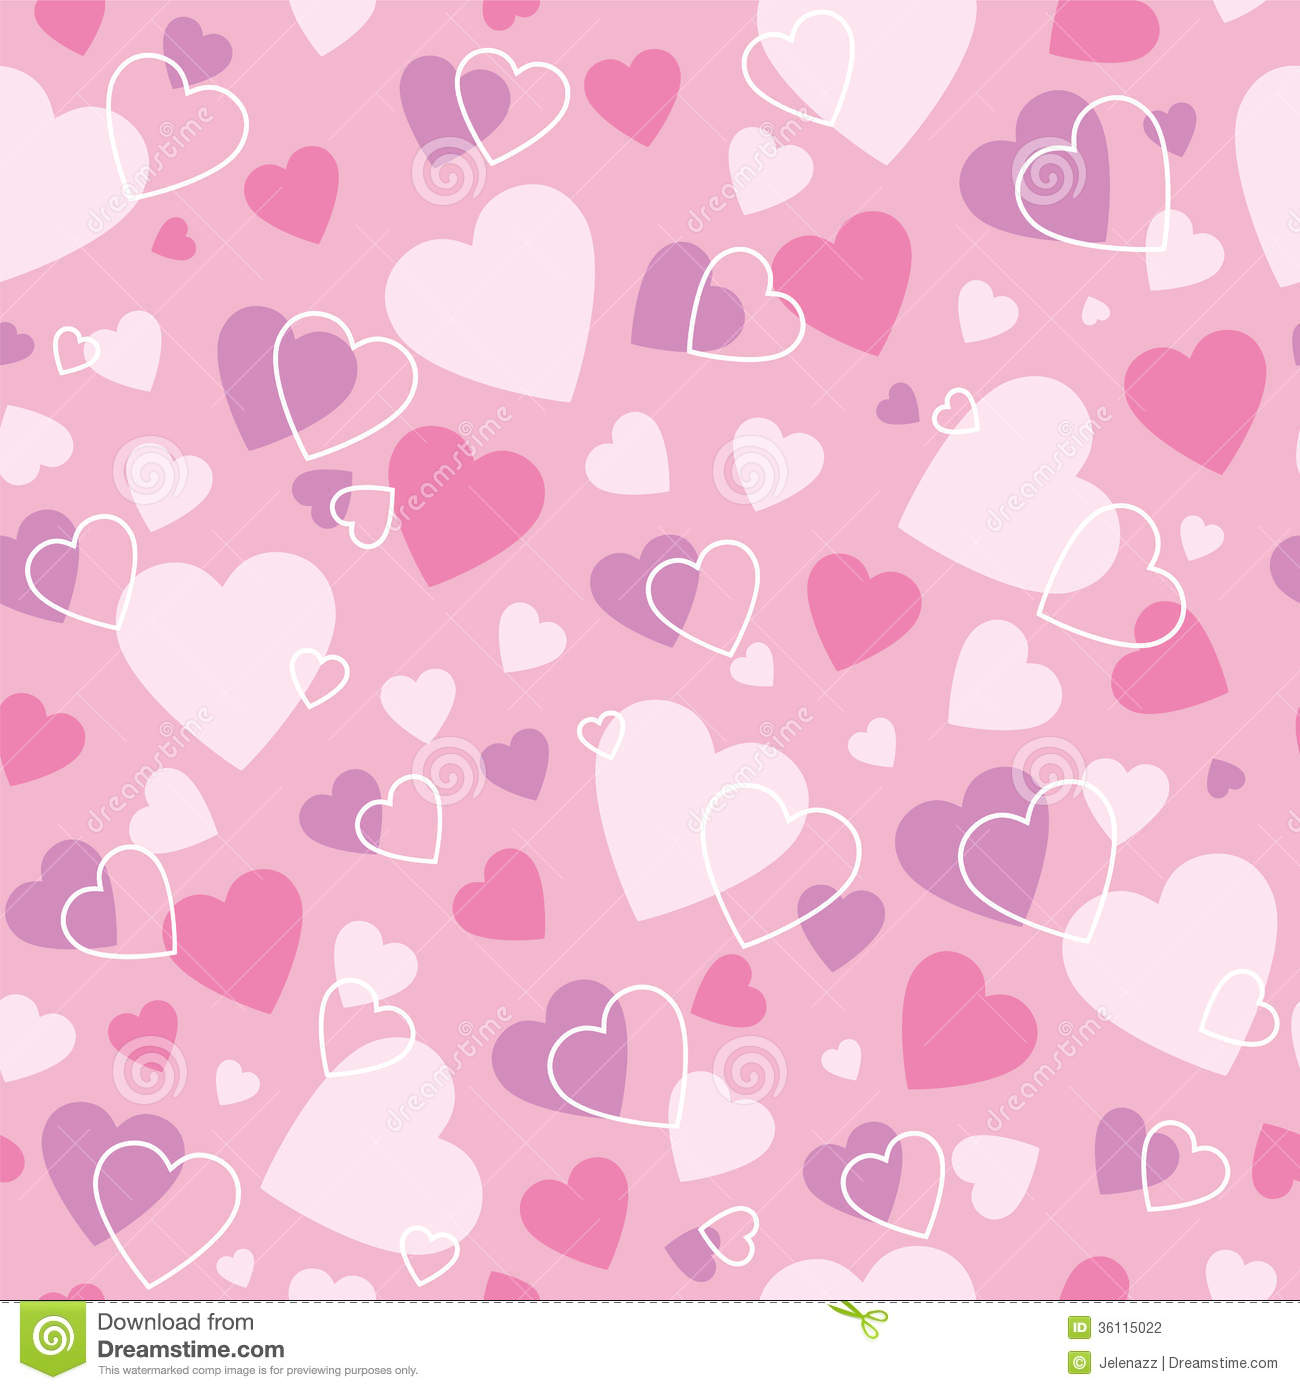 Cute Hearts Background